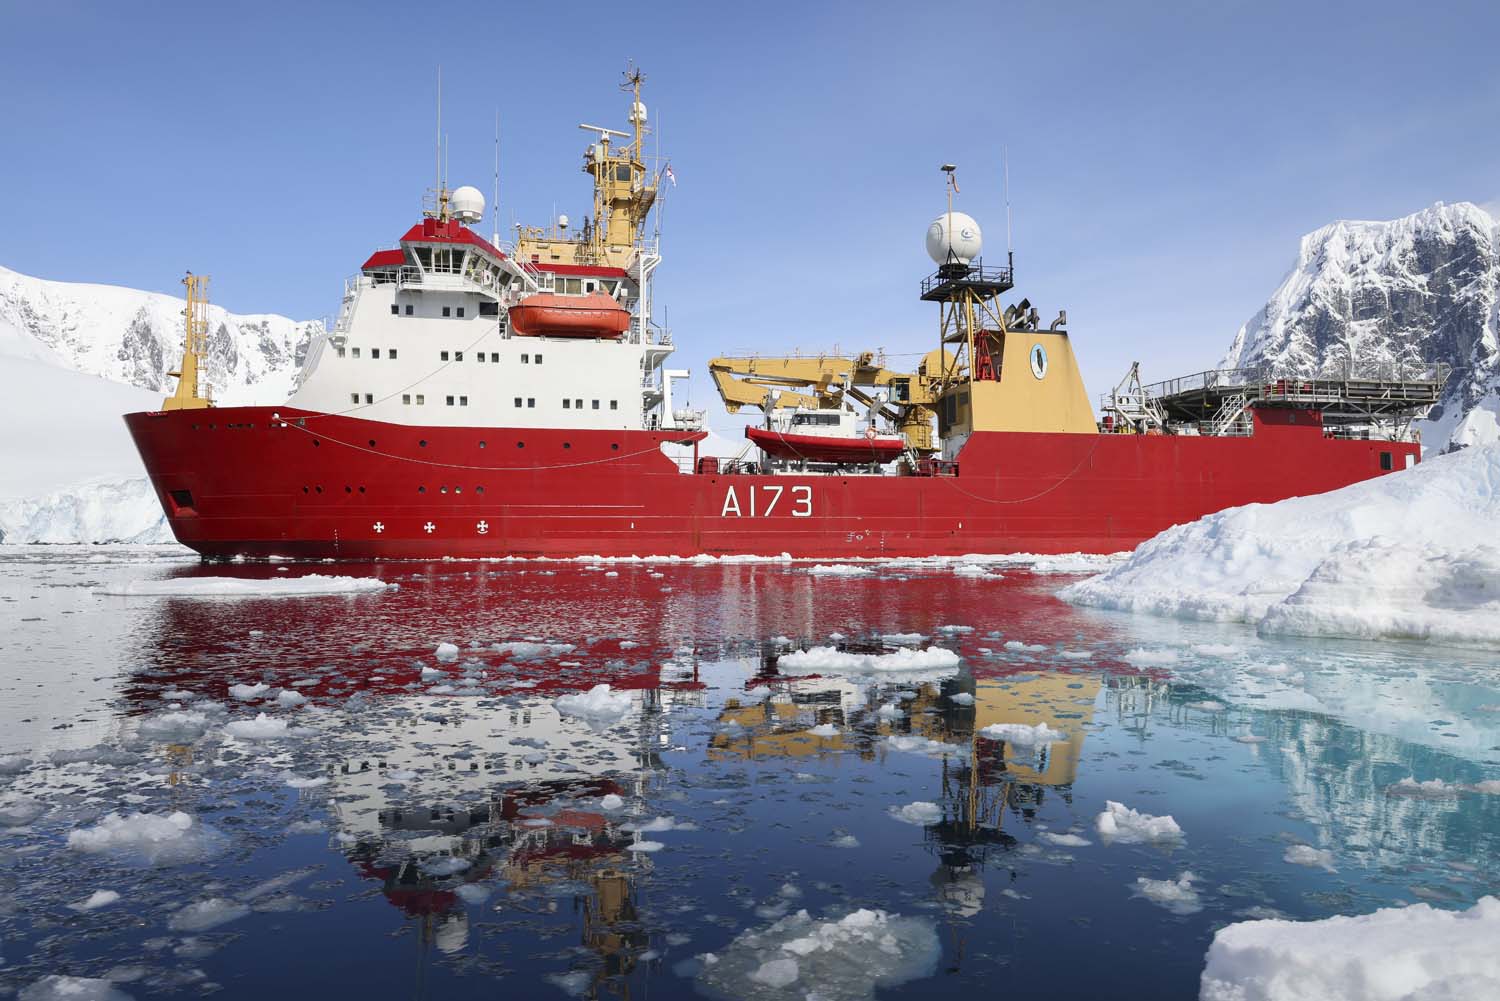 Royal Navy rescuers and polar photographer to be honoured by The King